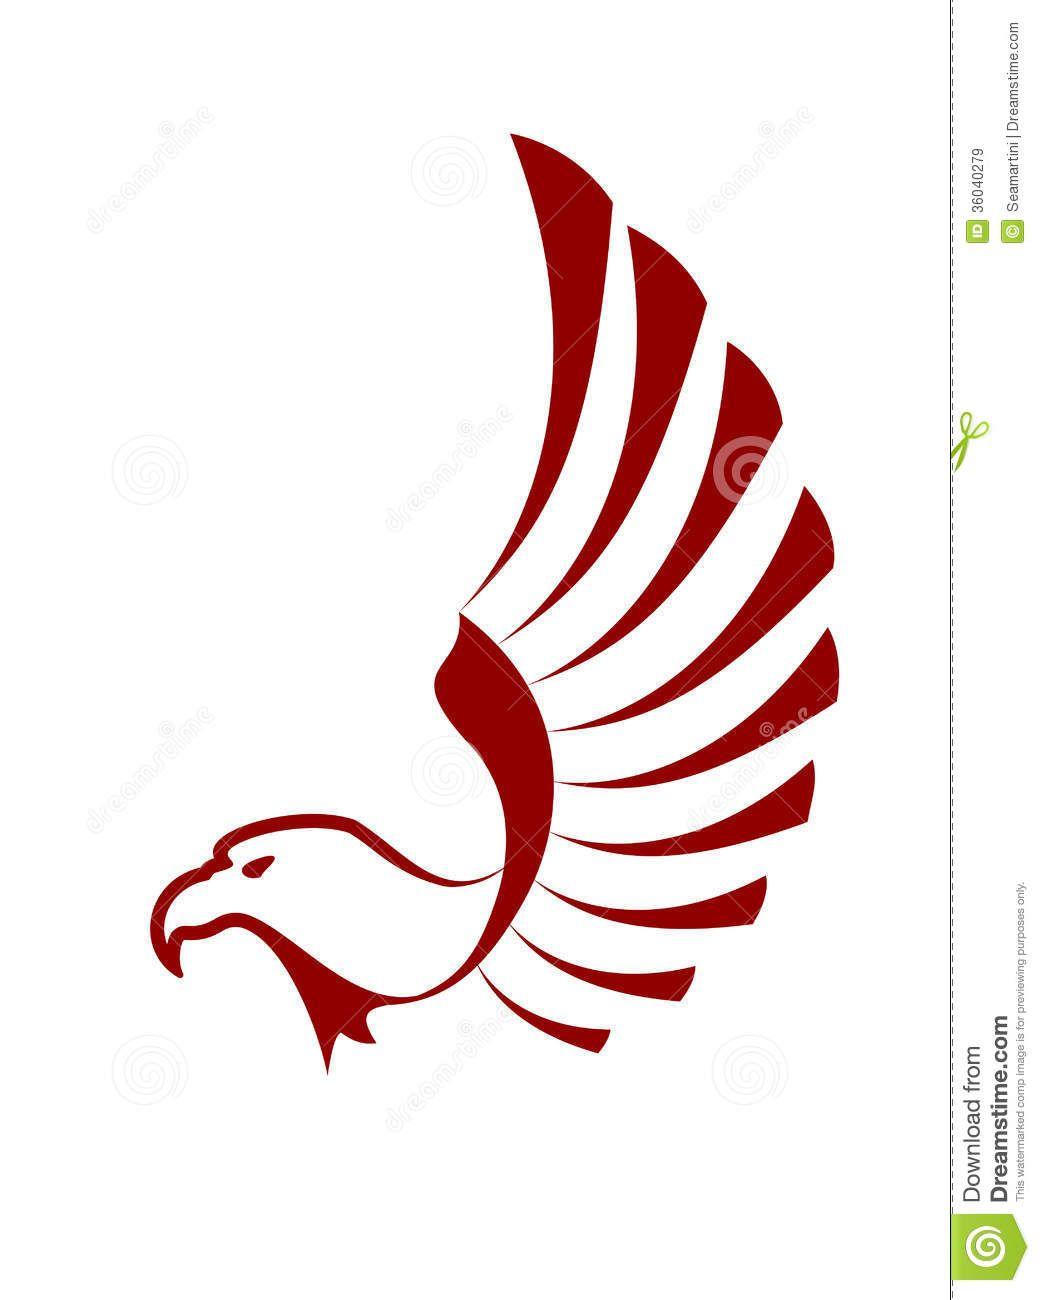 Red Eagles Logo - Red Eagle With Wings Royalty Free Stock Image: 36040279